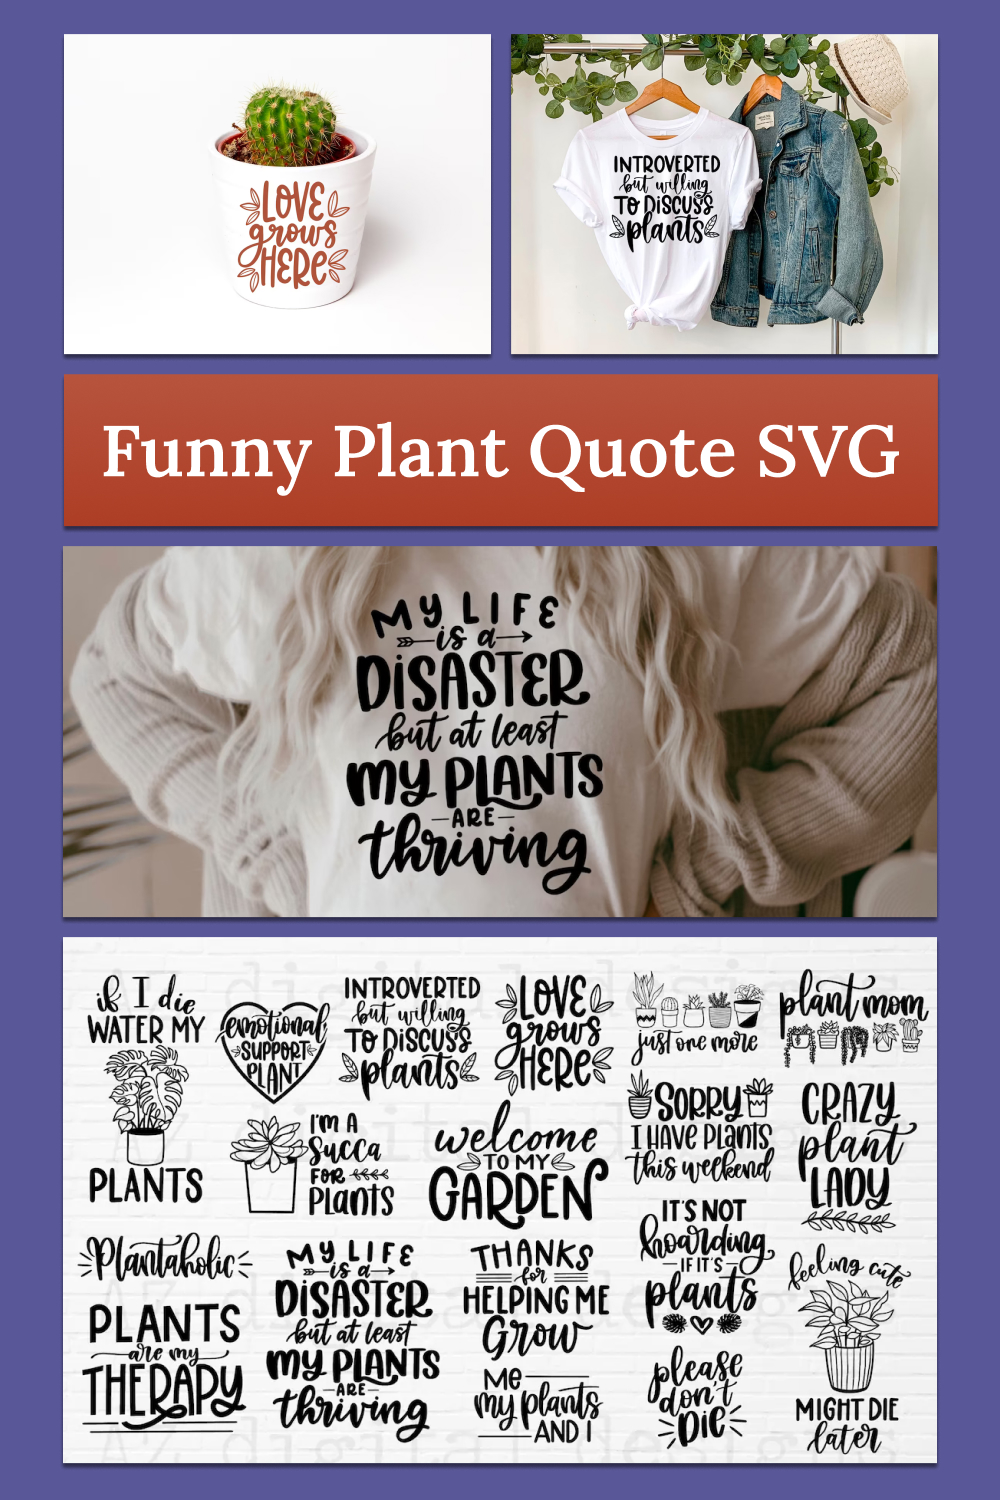 Funny plant quote of pinterest.